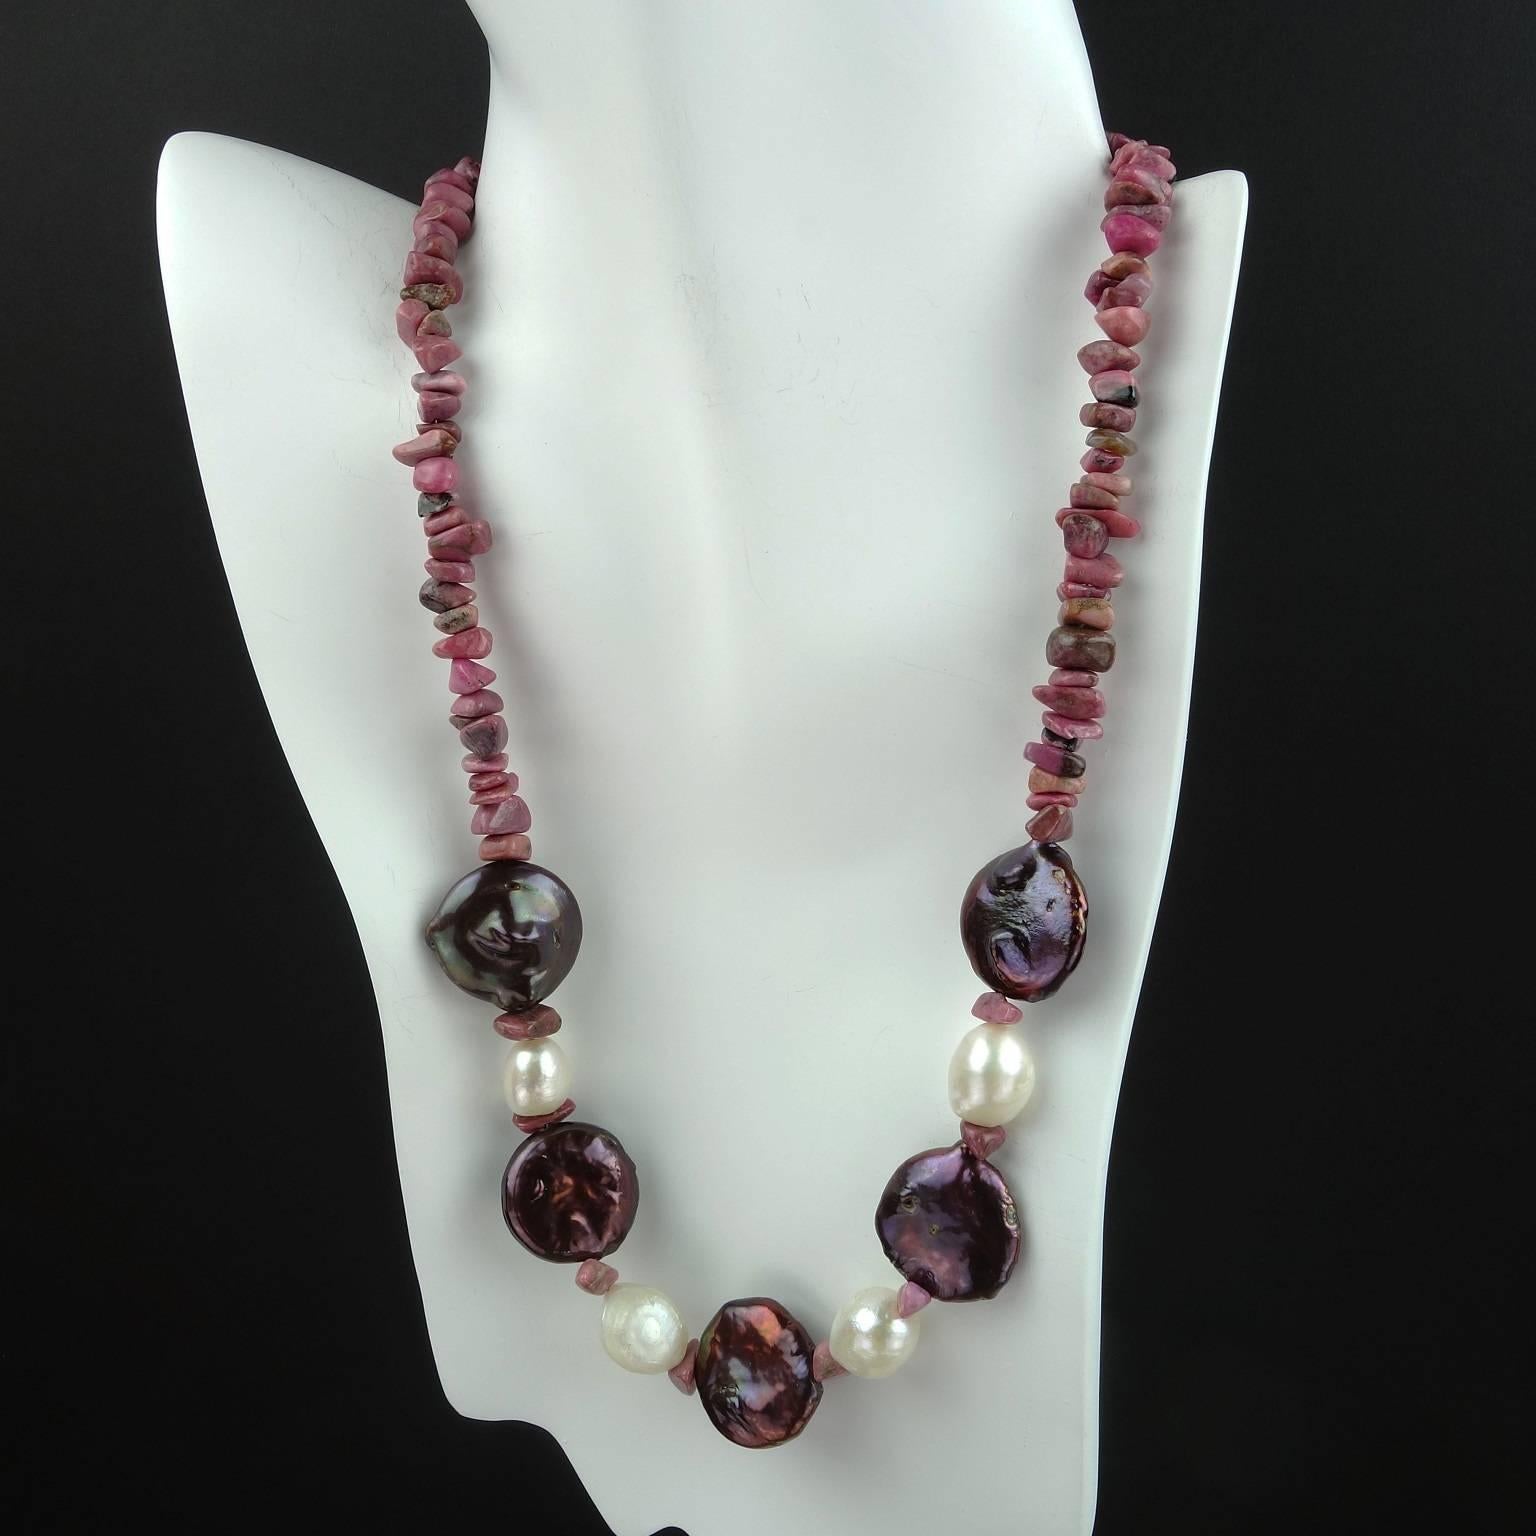 Iridescent Mauve Coin Pearls in Combination with Large Wrinkle Pearls grace the front of this Necklace. Polished tumbled Rhodonite chips complete this charming necklace along with a lovely baroque pearl clasp. These Mauve coin Pearls measure 20mm,